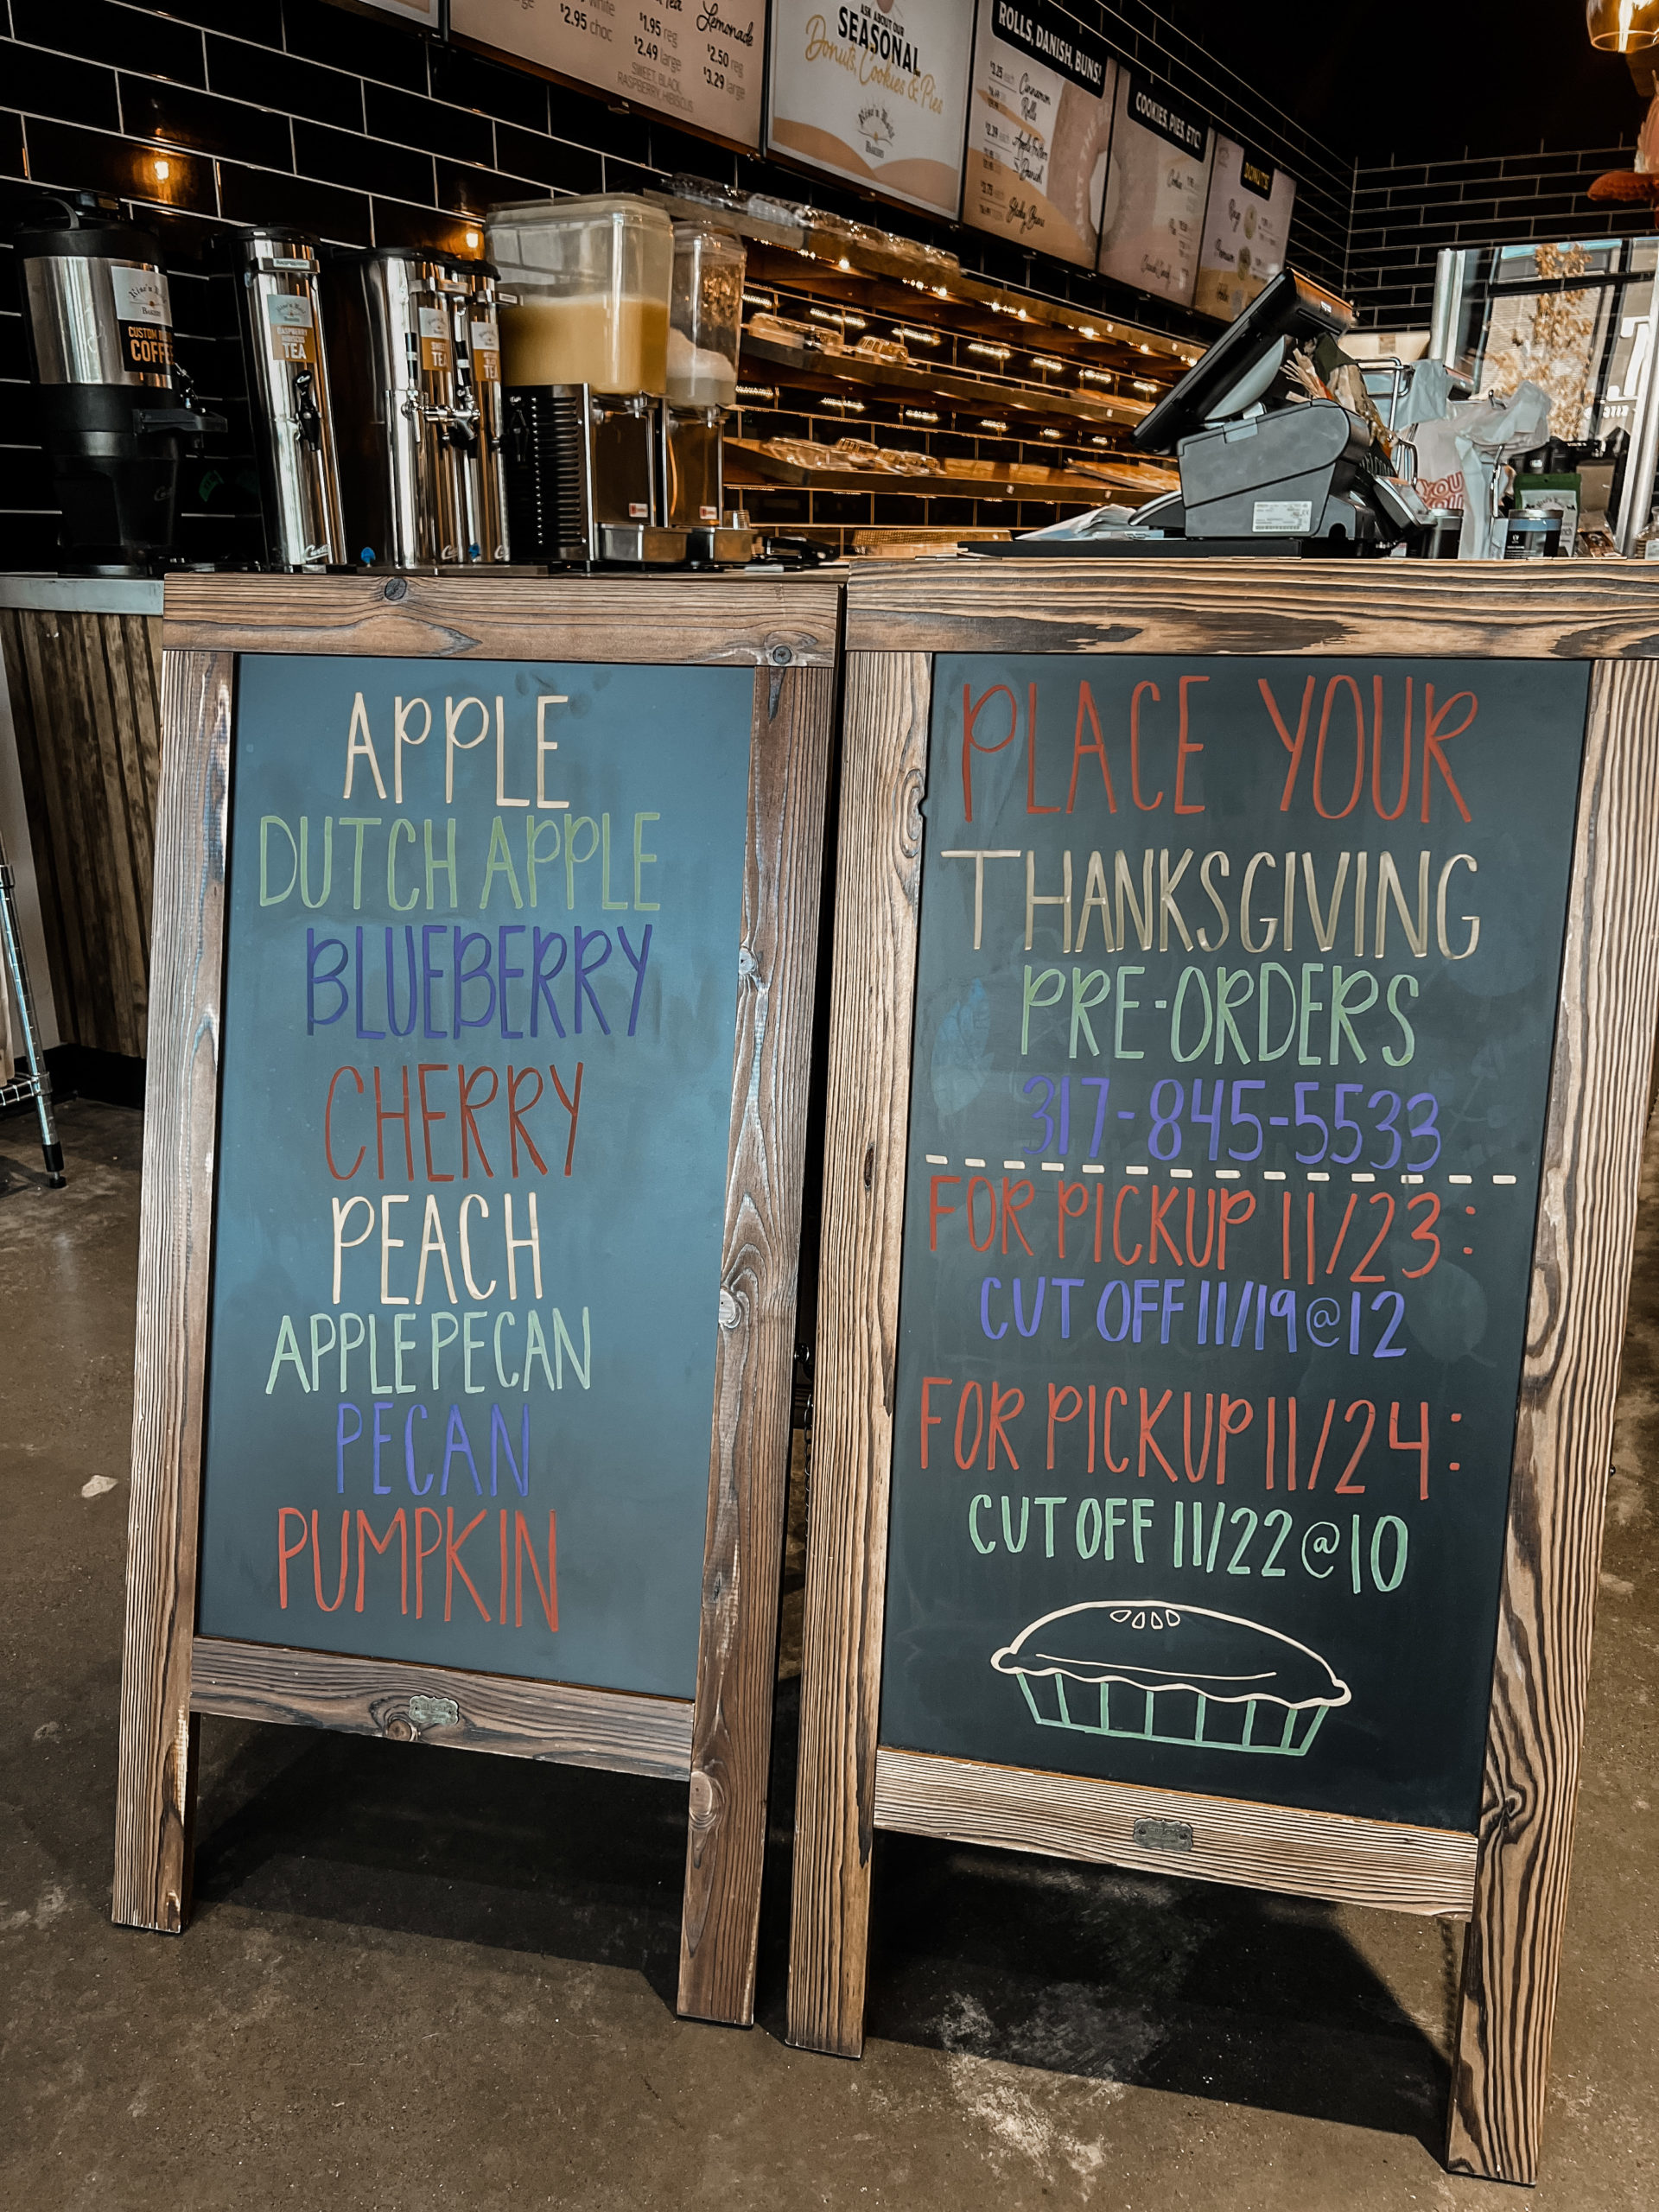 two chalkboard signs. the one on the left reads: apple, dutch apple, blueberry, cherry, peach, apple pecan, pecan, and pumpkin. the one on the right reads: place your thanksgiving pre-orders 3178455533. for pickup 11/23: cut off 11/19 at 12:00. for pickup 11/24: cut off 11/22 at 10:00